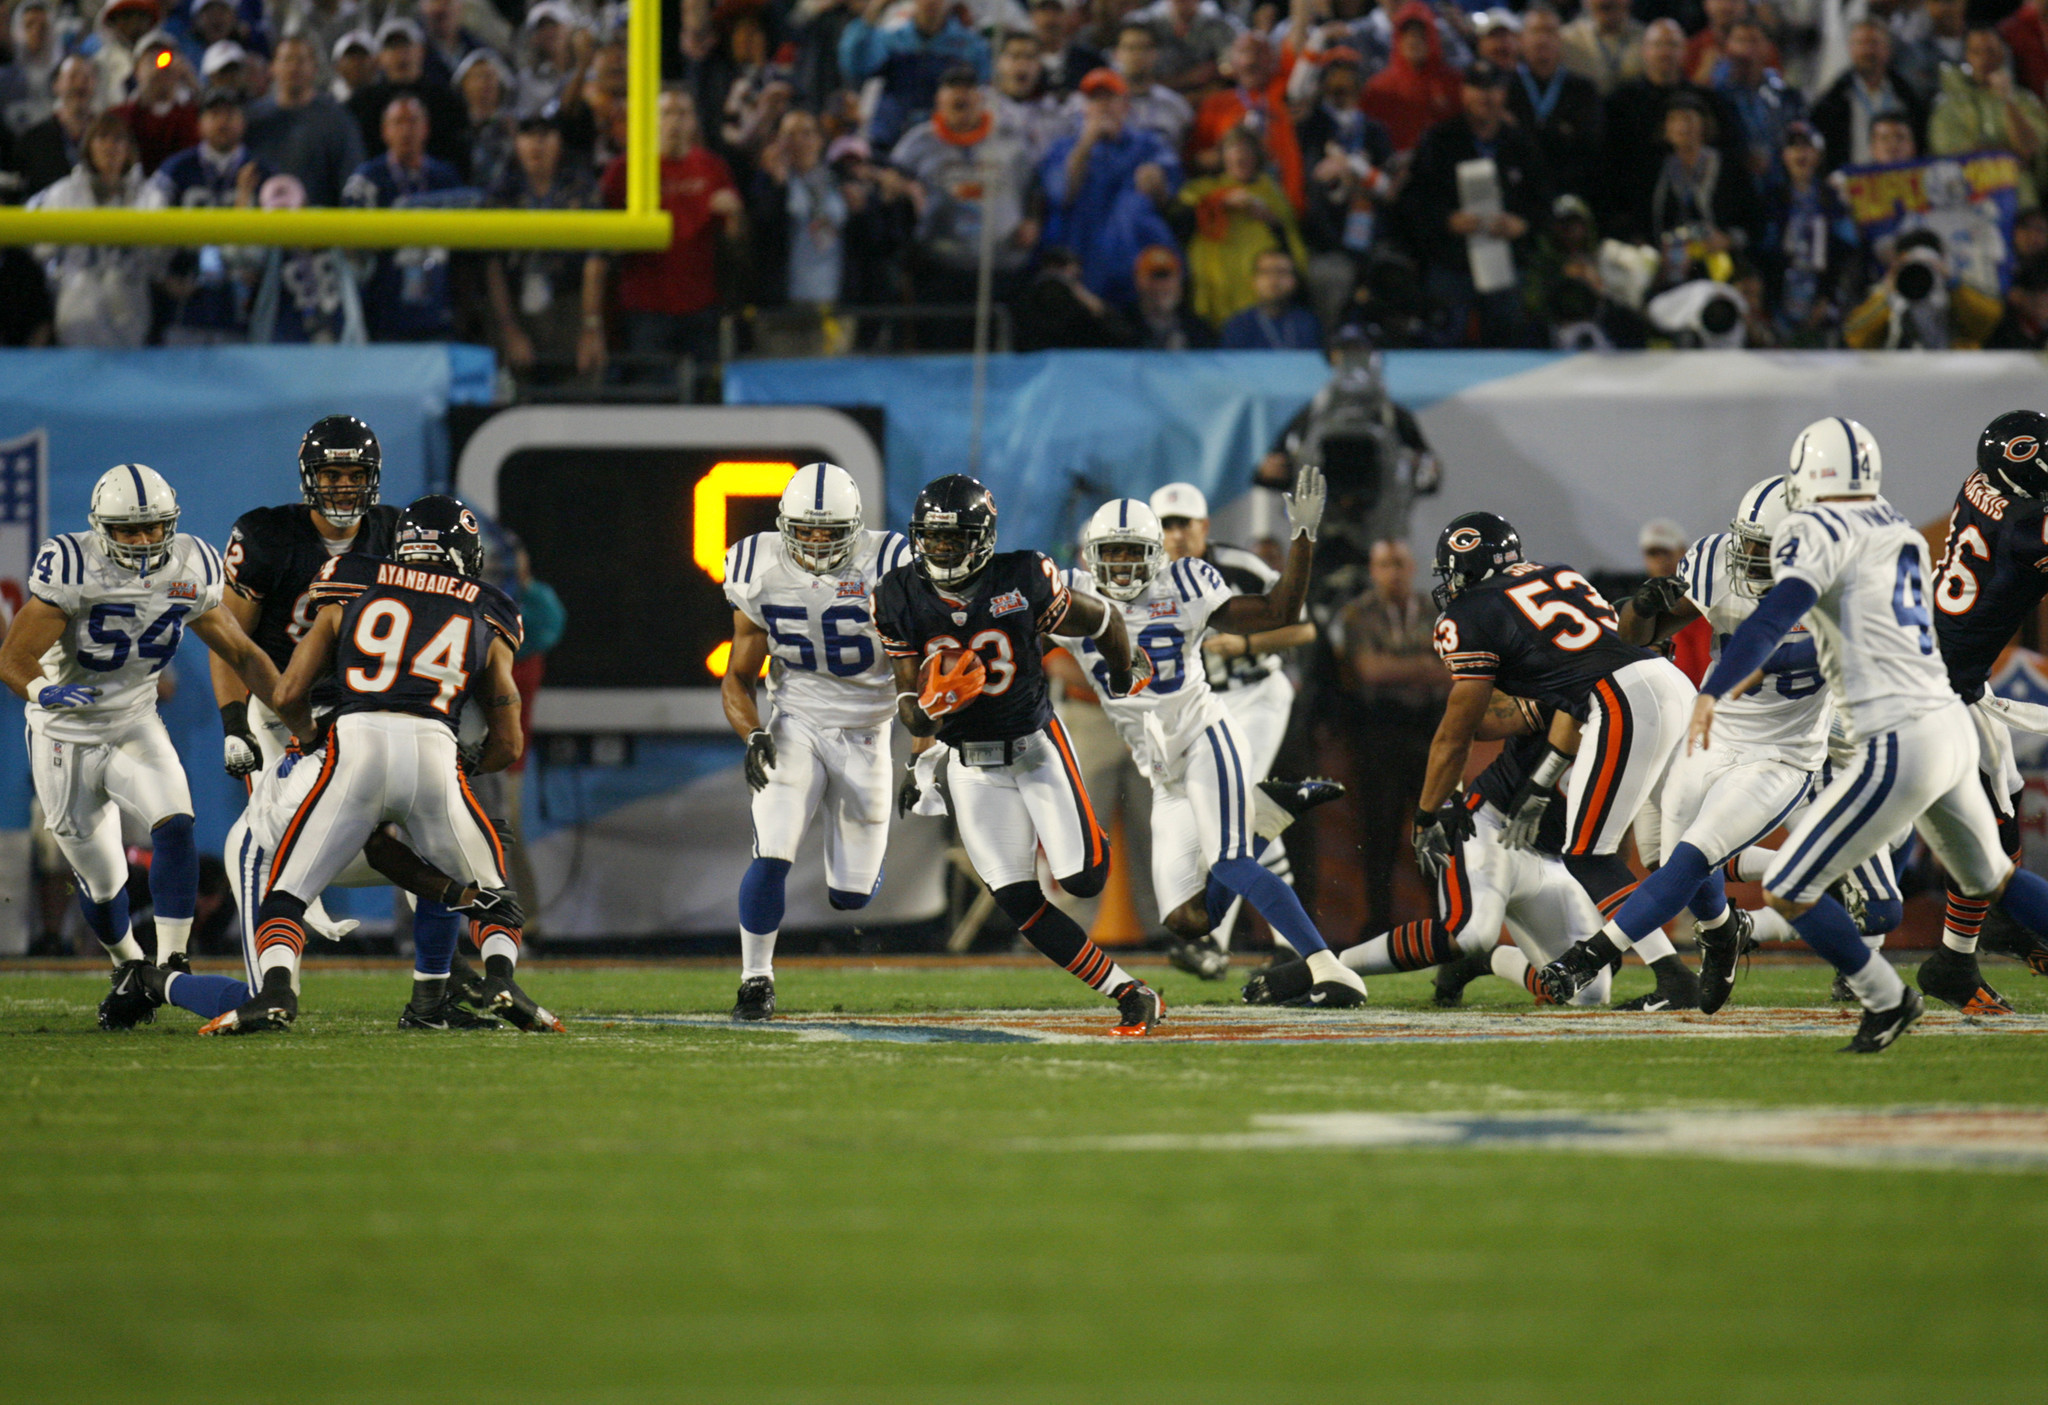 Special teams stars see Devin Hester as Hall of Famer